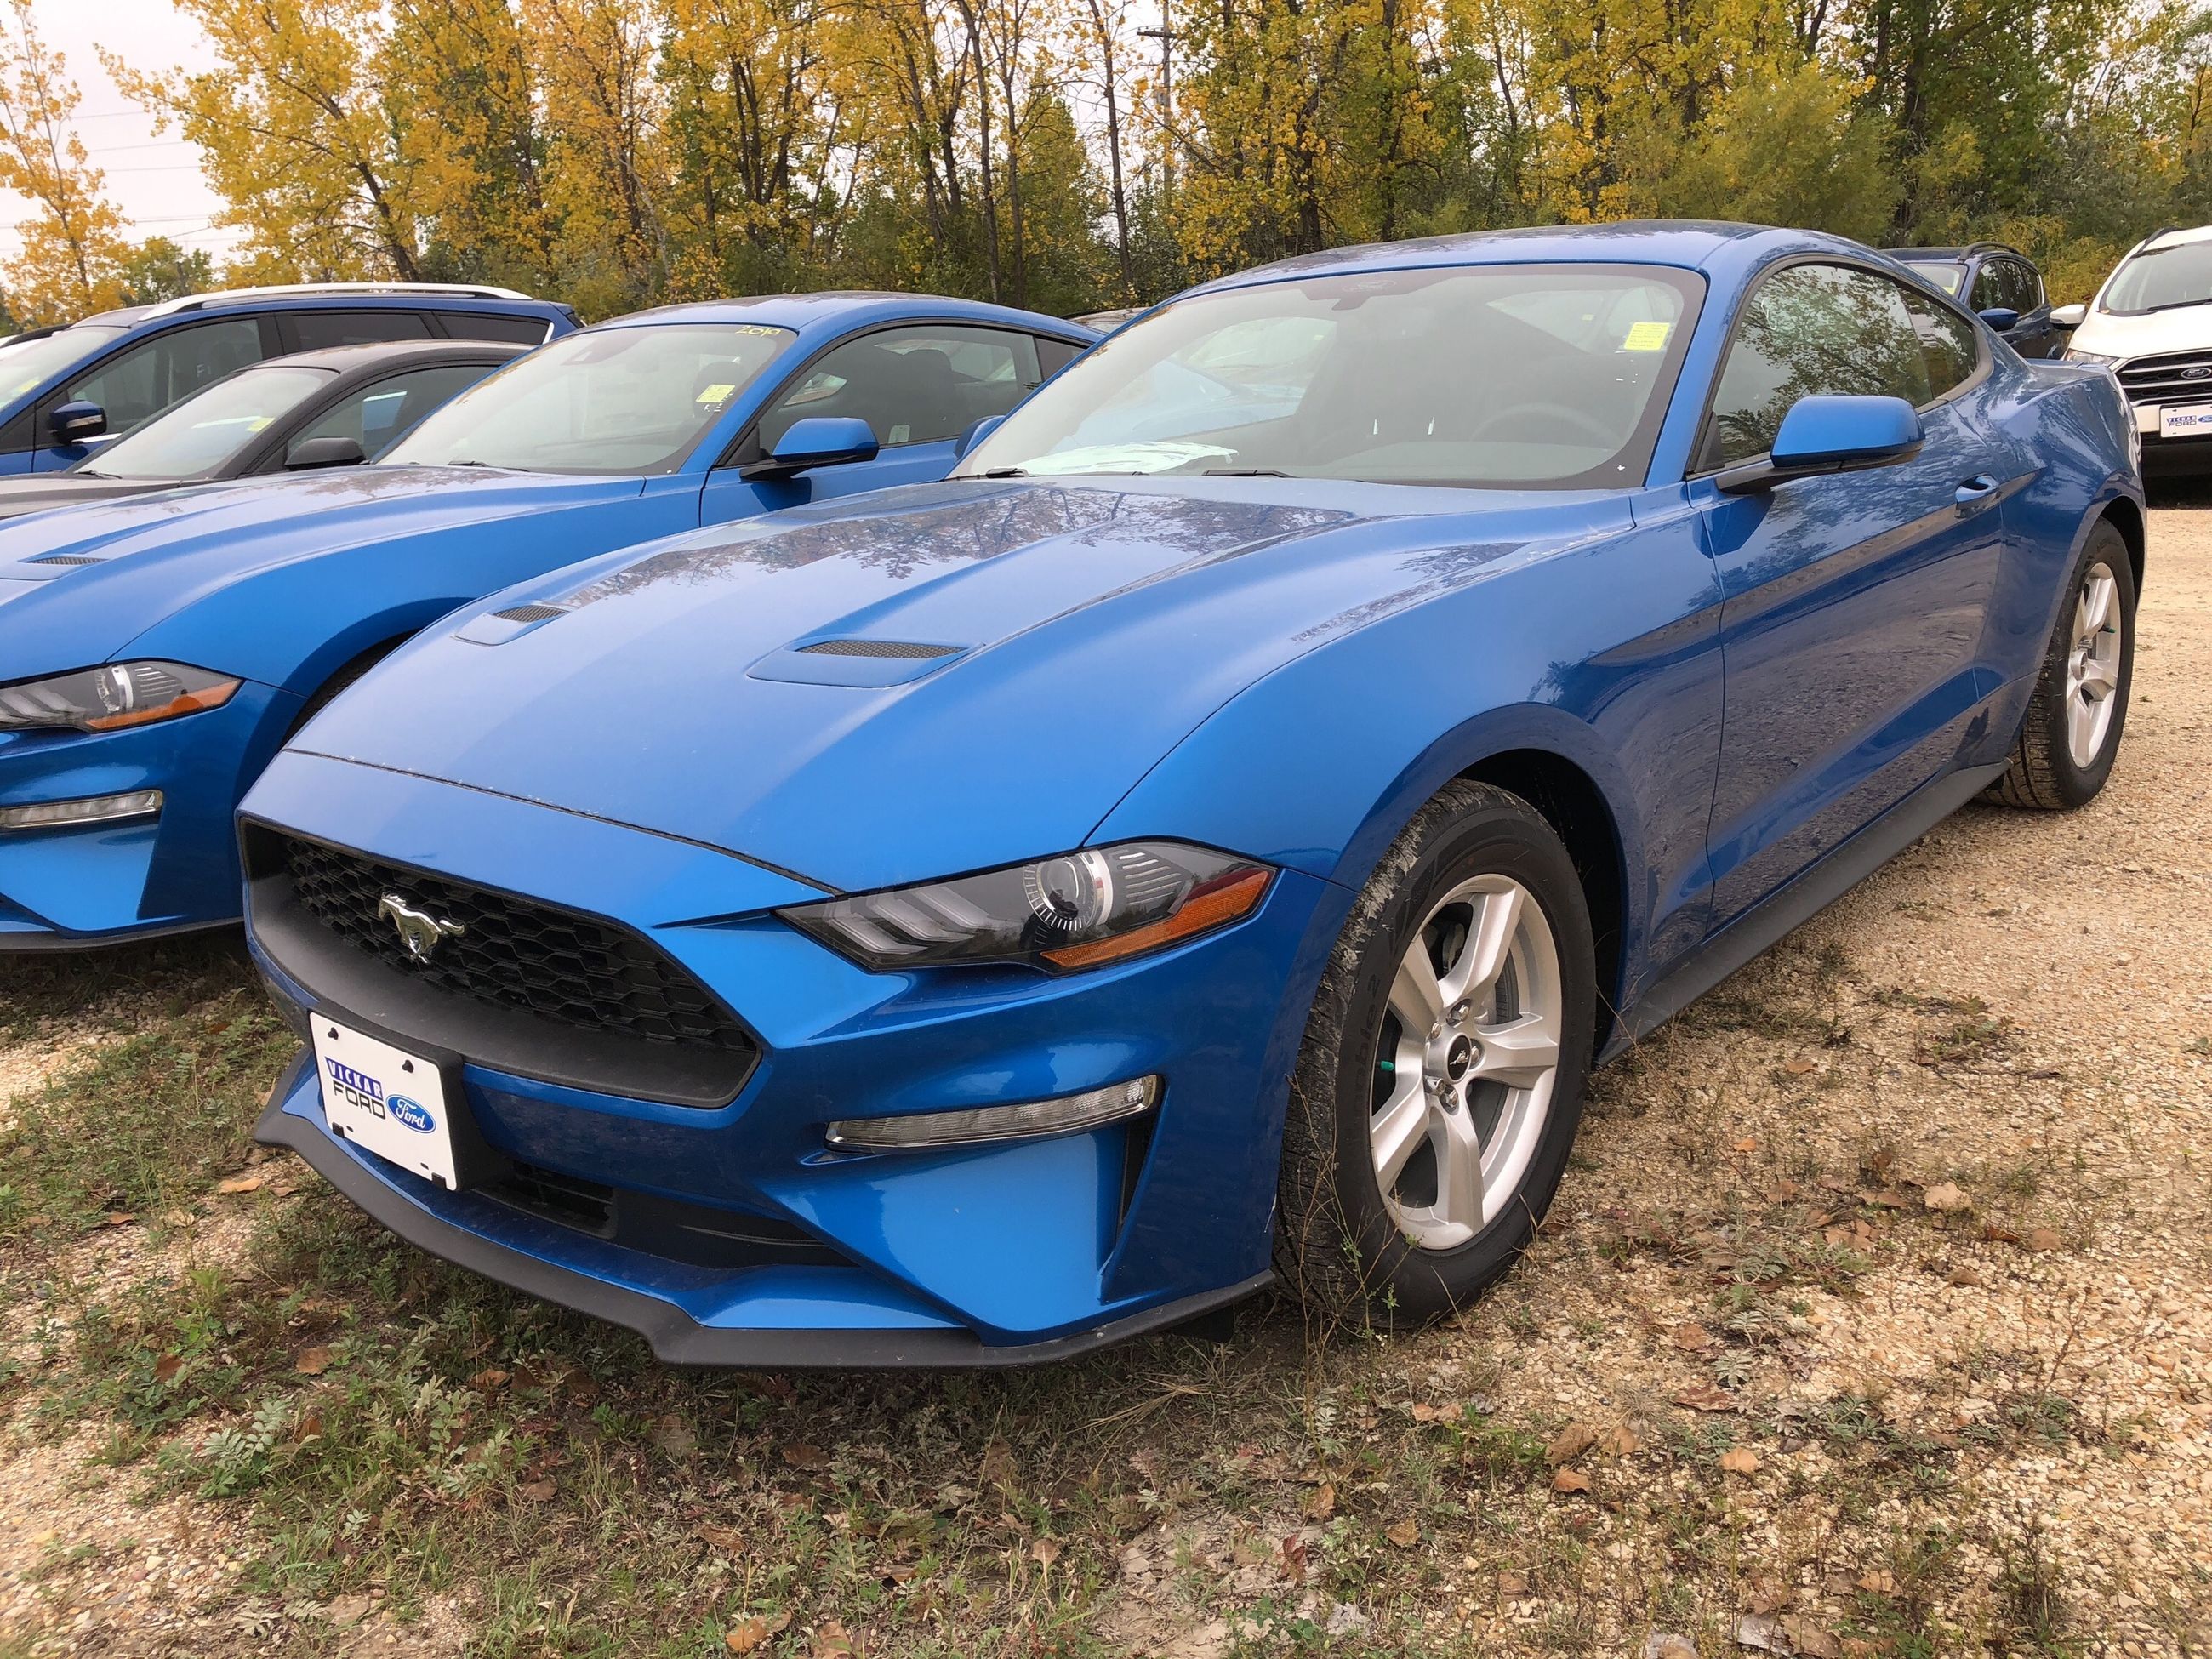 New 2019 Ford Mustang Velocity Blue For Sale 3167975 19c0920